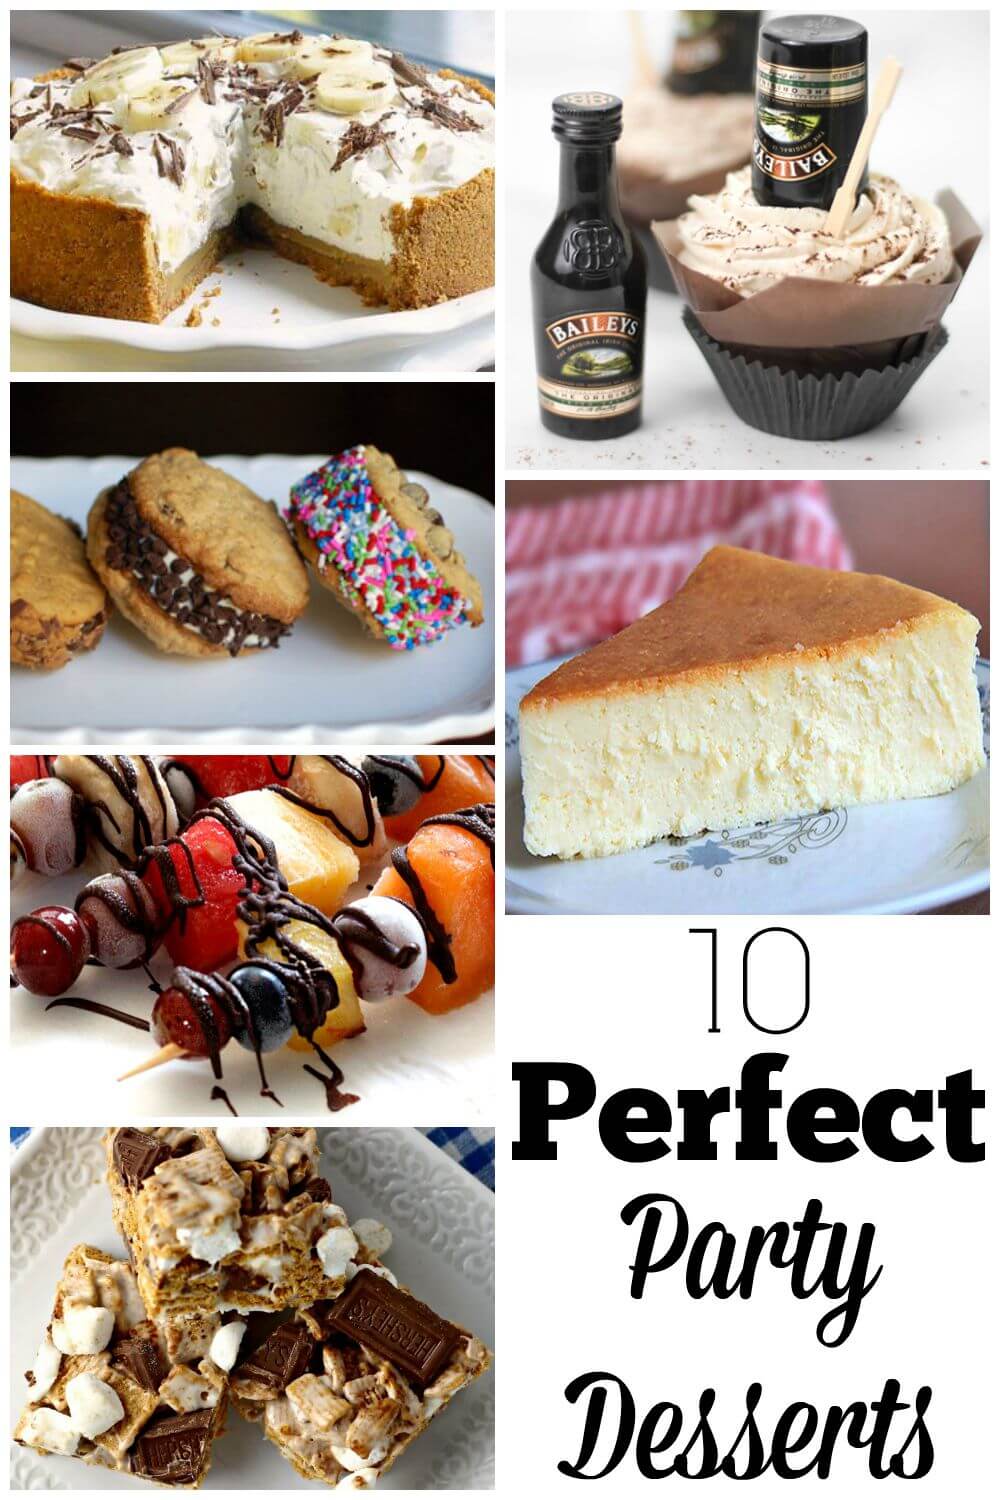 It's always fun walking into a party carrying a mouth watering dessert. I've brought together 10 of my favorites to share at your next party.